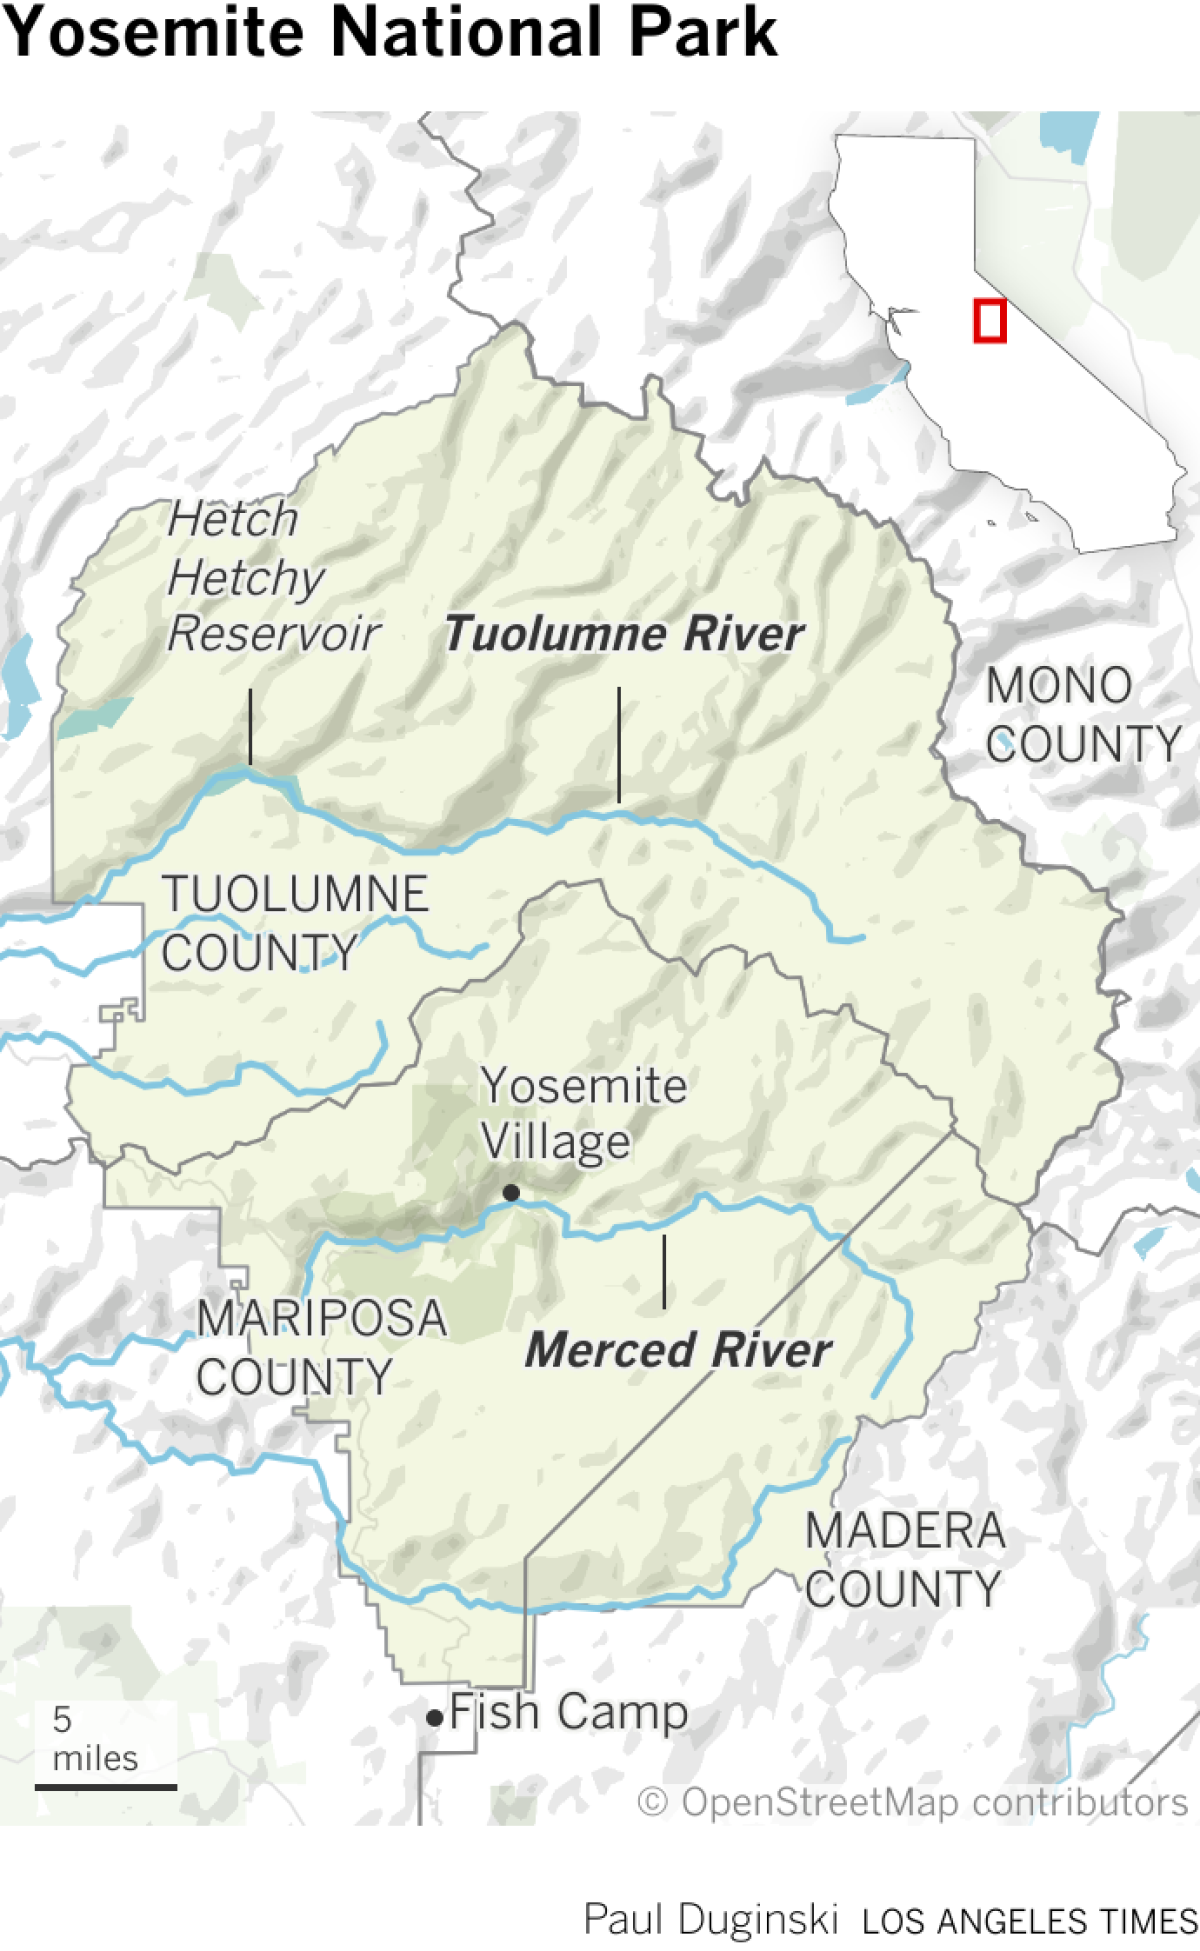 The boundary of Yosemite National Park with the Tuolumne and Merced rivers.